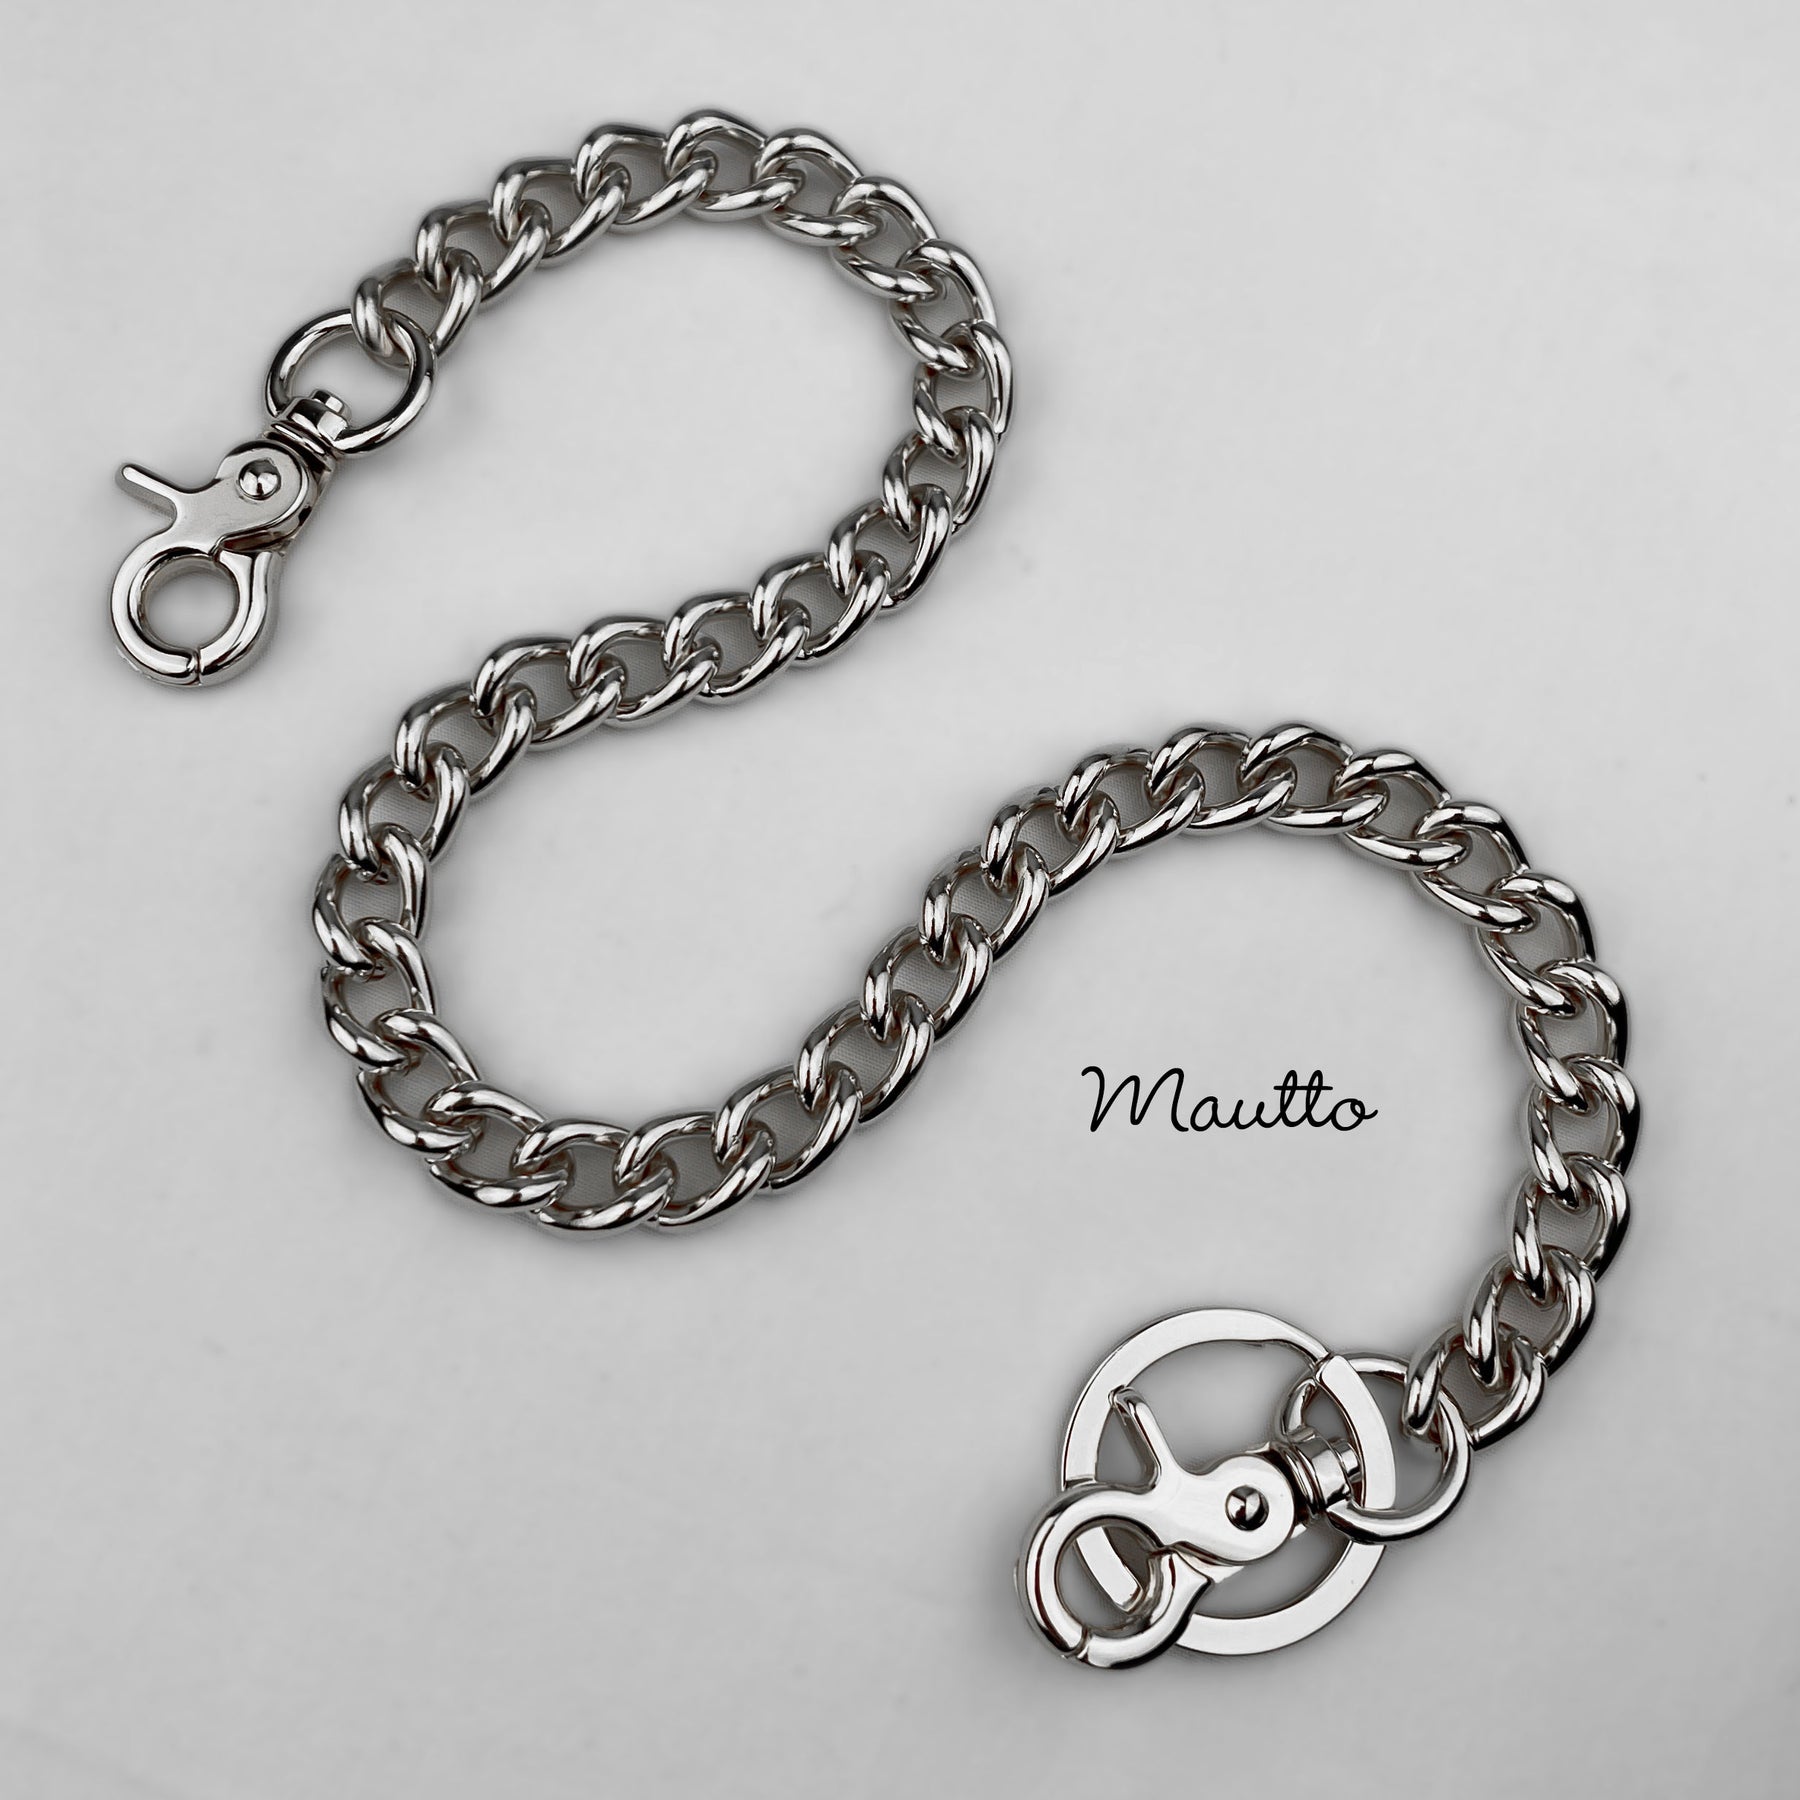 Mautto Wallet Chain / Key Tether - Standard & Long Lengths, Removable Keyring Standard - 18 Inches / Silver-Tone